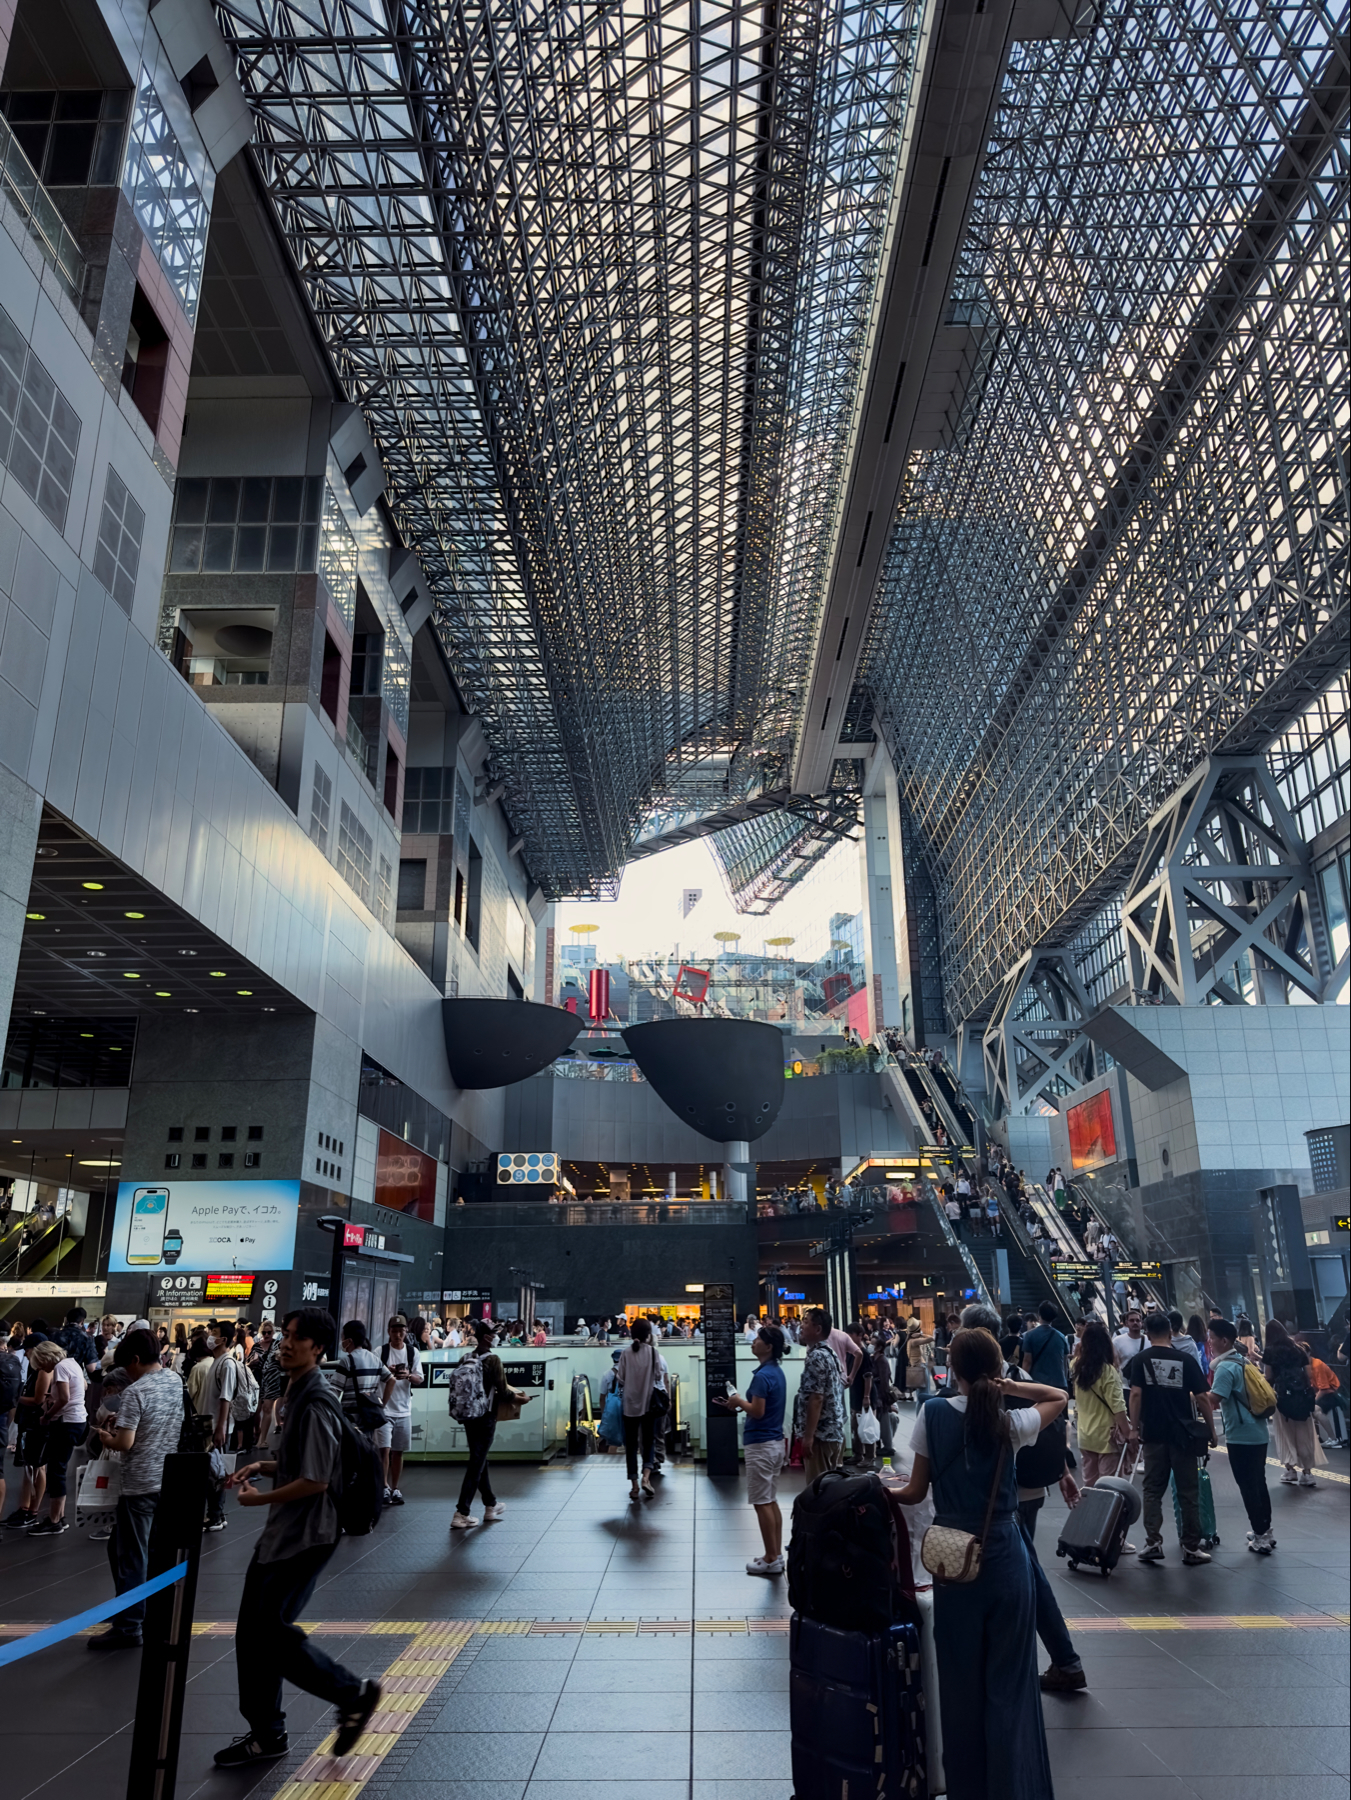 Interior of modern looking Kyoto train station with a high geometric ceiling, bustling with people and featuring escalators and large video screens.